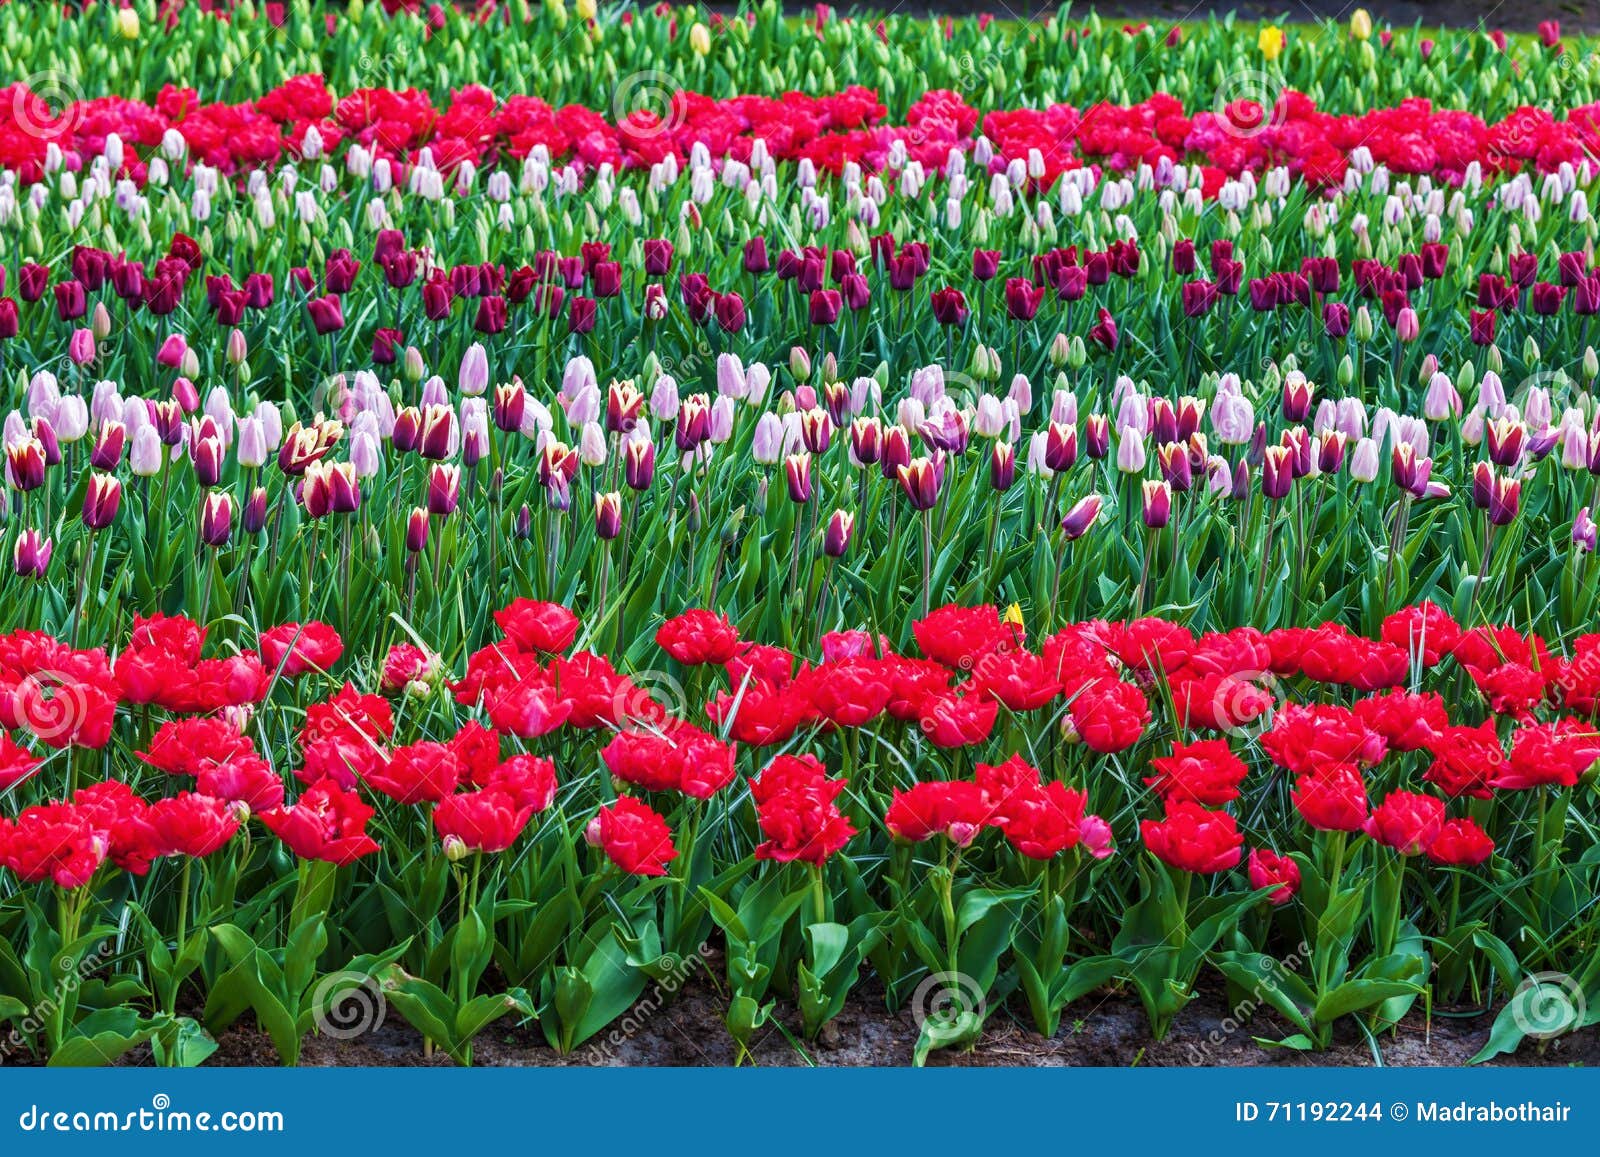 colorful flowers at the famous flower park keukenhof in lisse